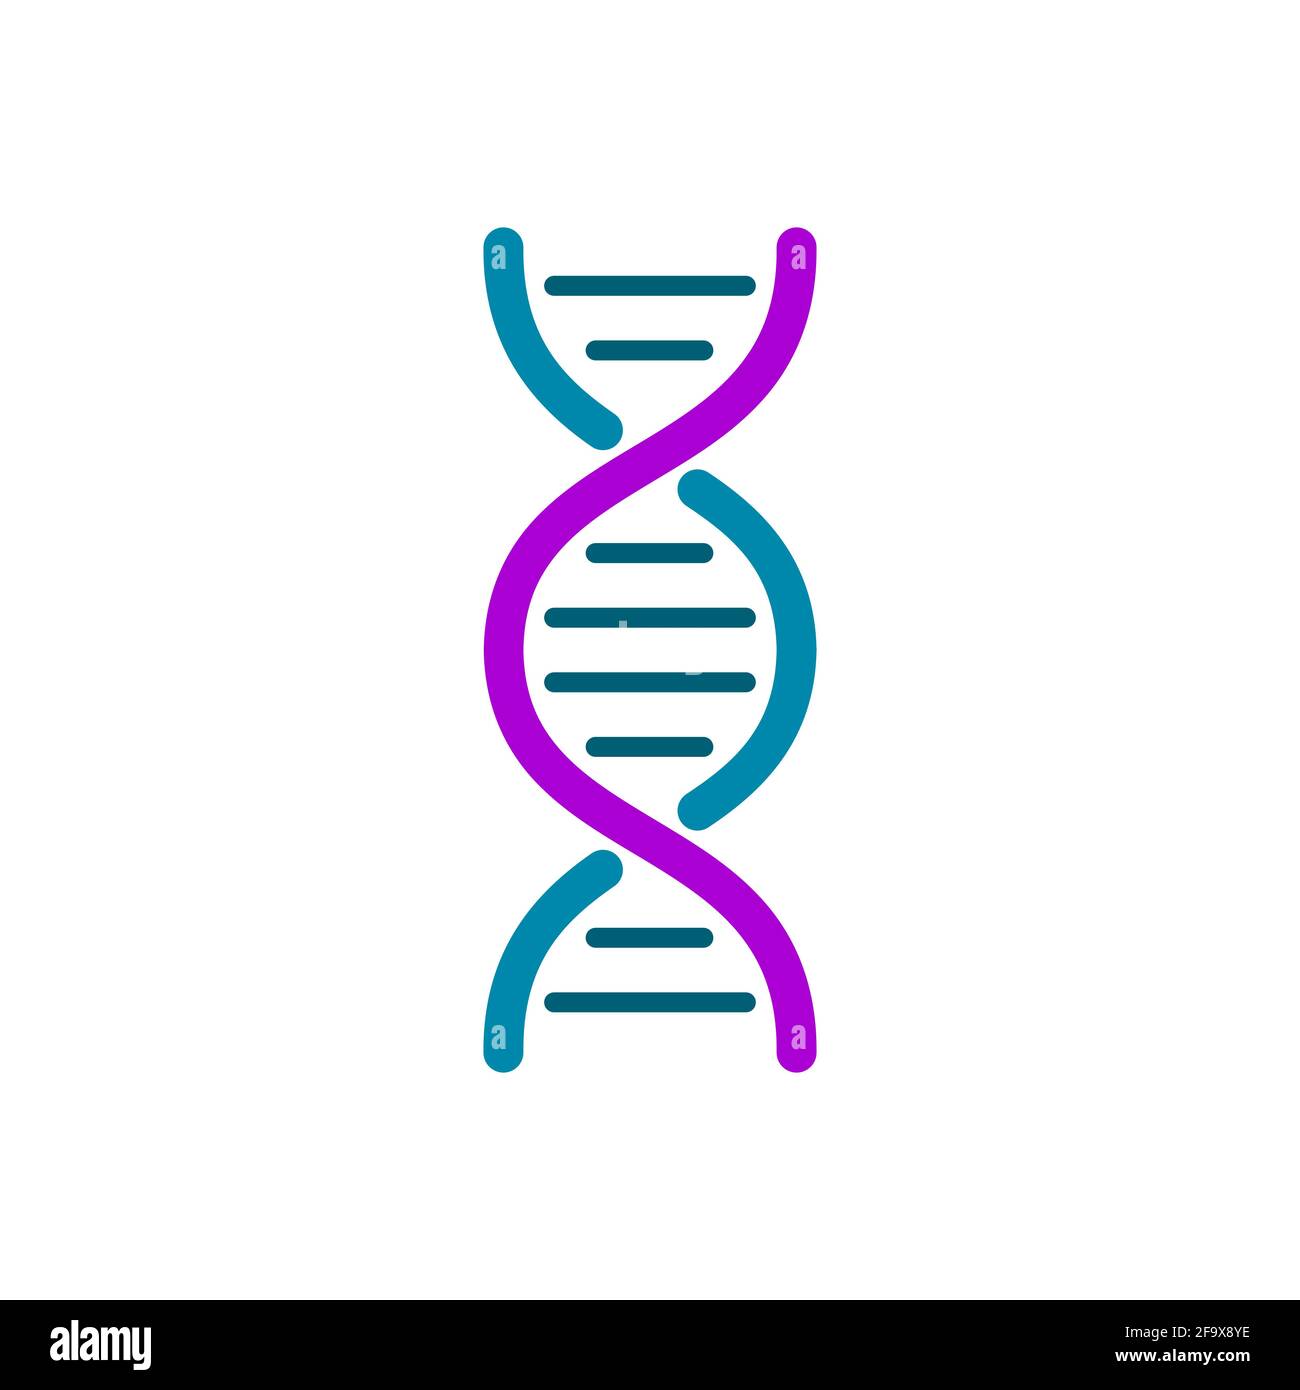 Colorful DNA icon. Simple DNA helix on white background. Genetic material symbol. Blue and purple DNA spiral molecule. Human genome design element. Stock Vector